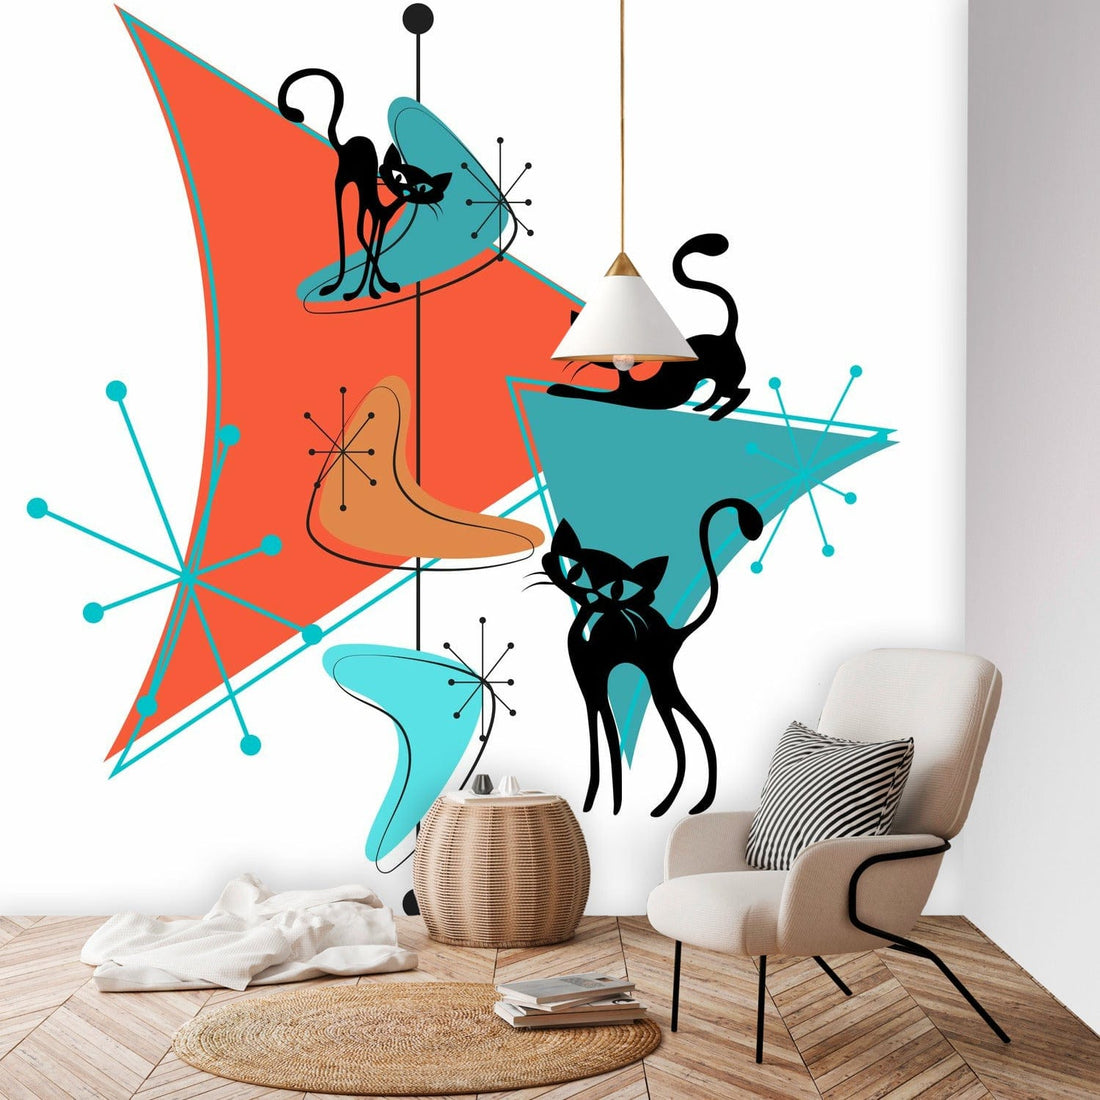 Atomic Cat Designed Peel And Stick, Kitschy Mid Century Modern Wall Paper Wall Mural Wallpaper H96 x W100